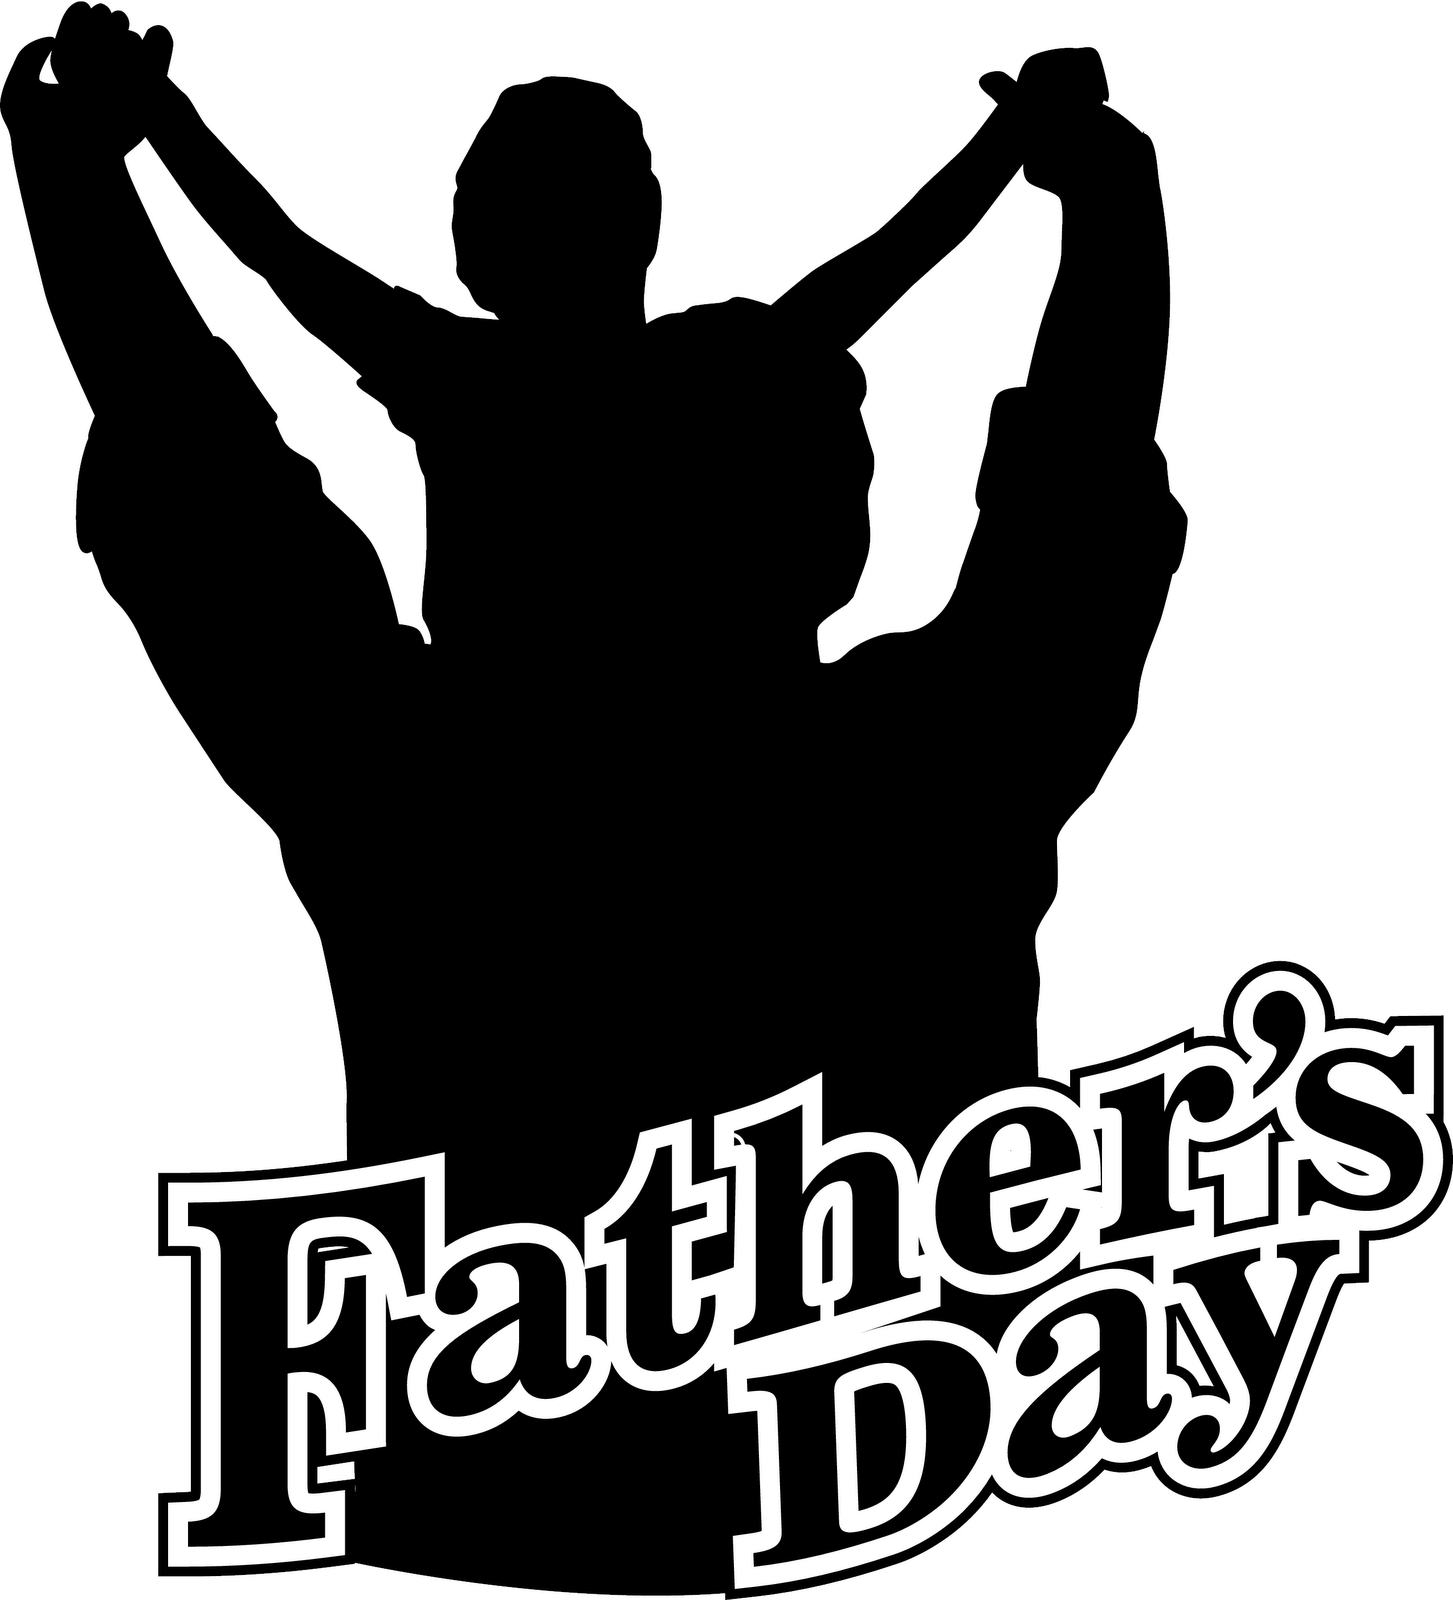 Dishwasher: Father s day clip art